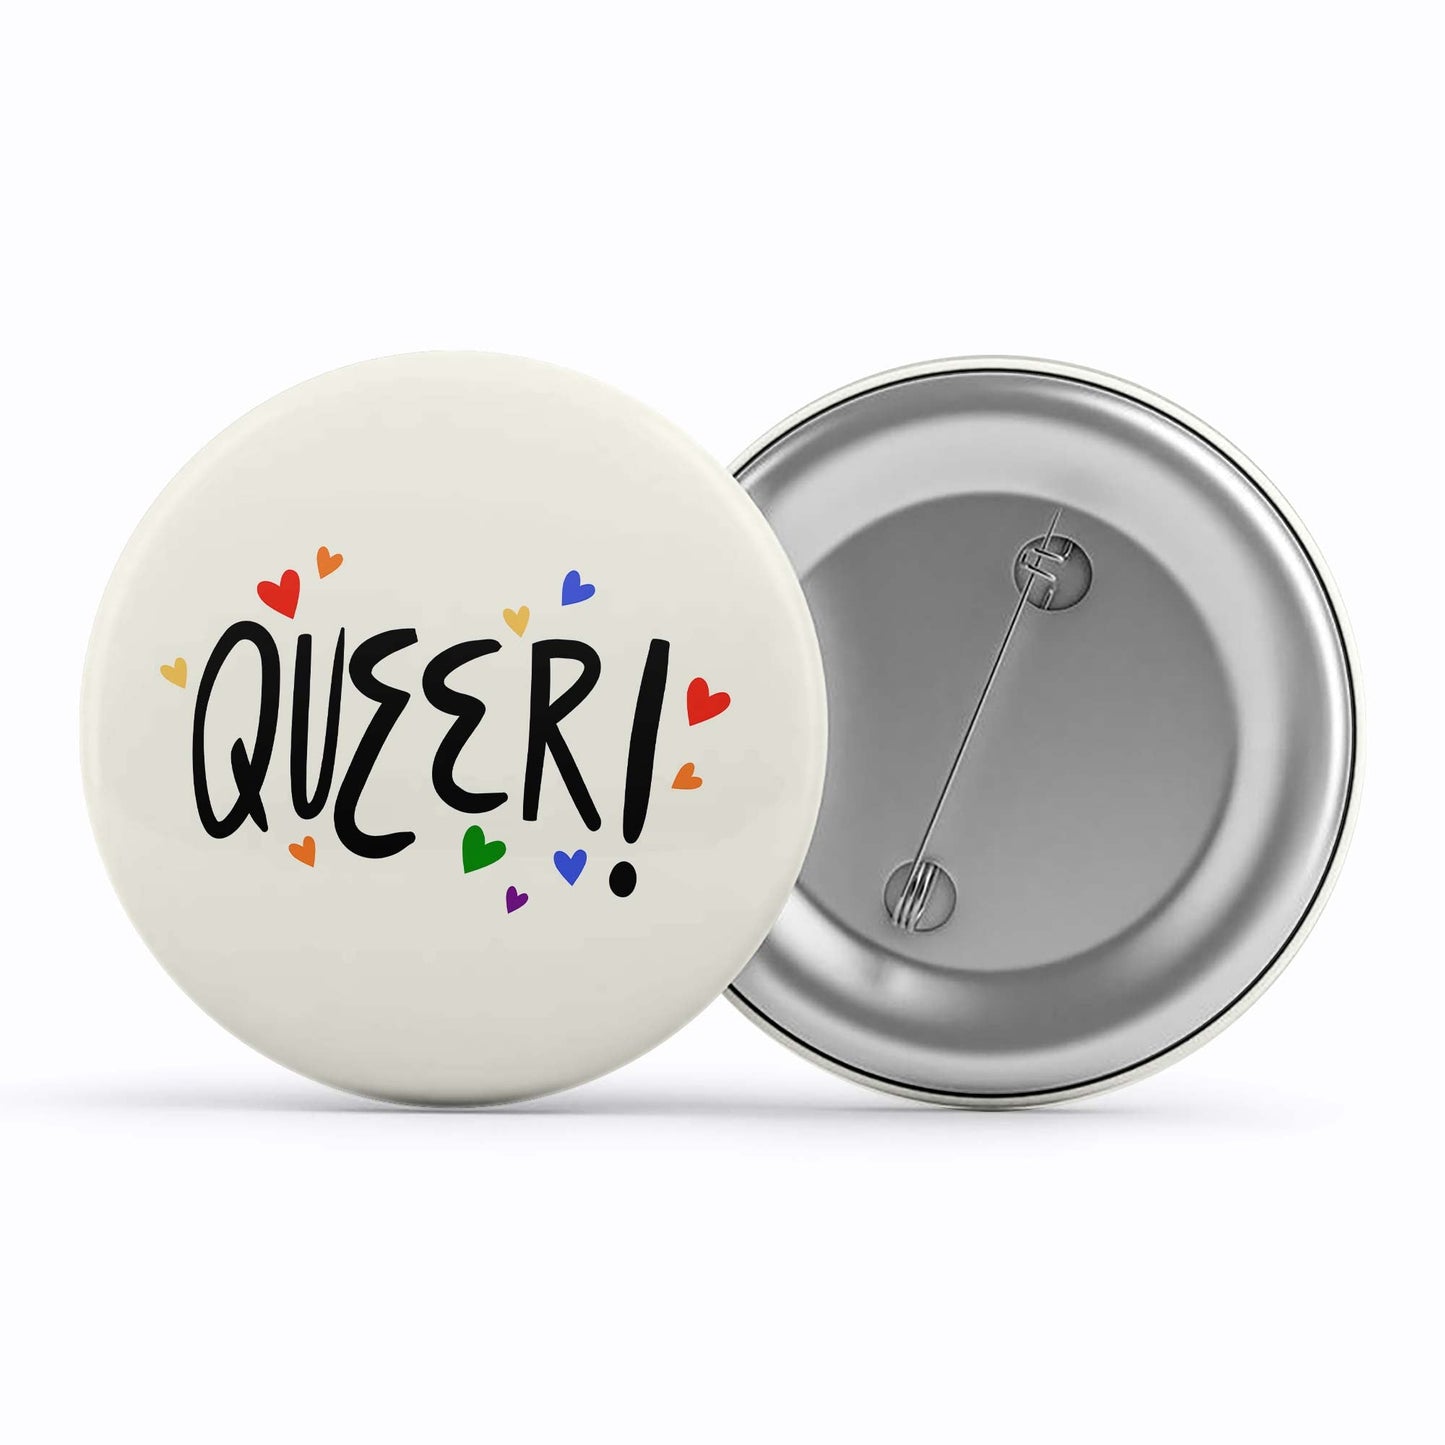 pride queer badge pin button printed graphic stylish buy online india the banyan tee tbt men women girls boys unisex  - lgbtqia+